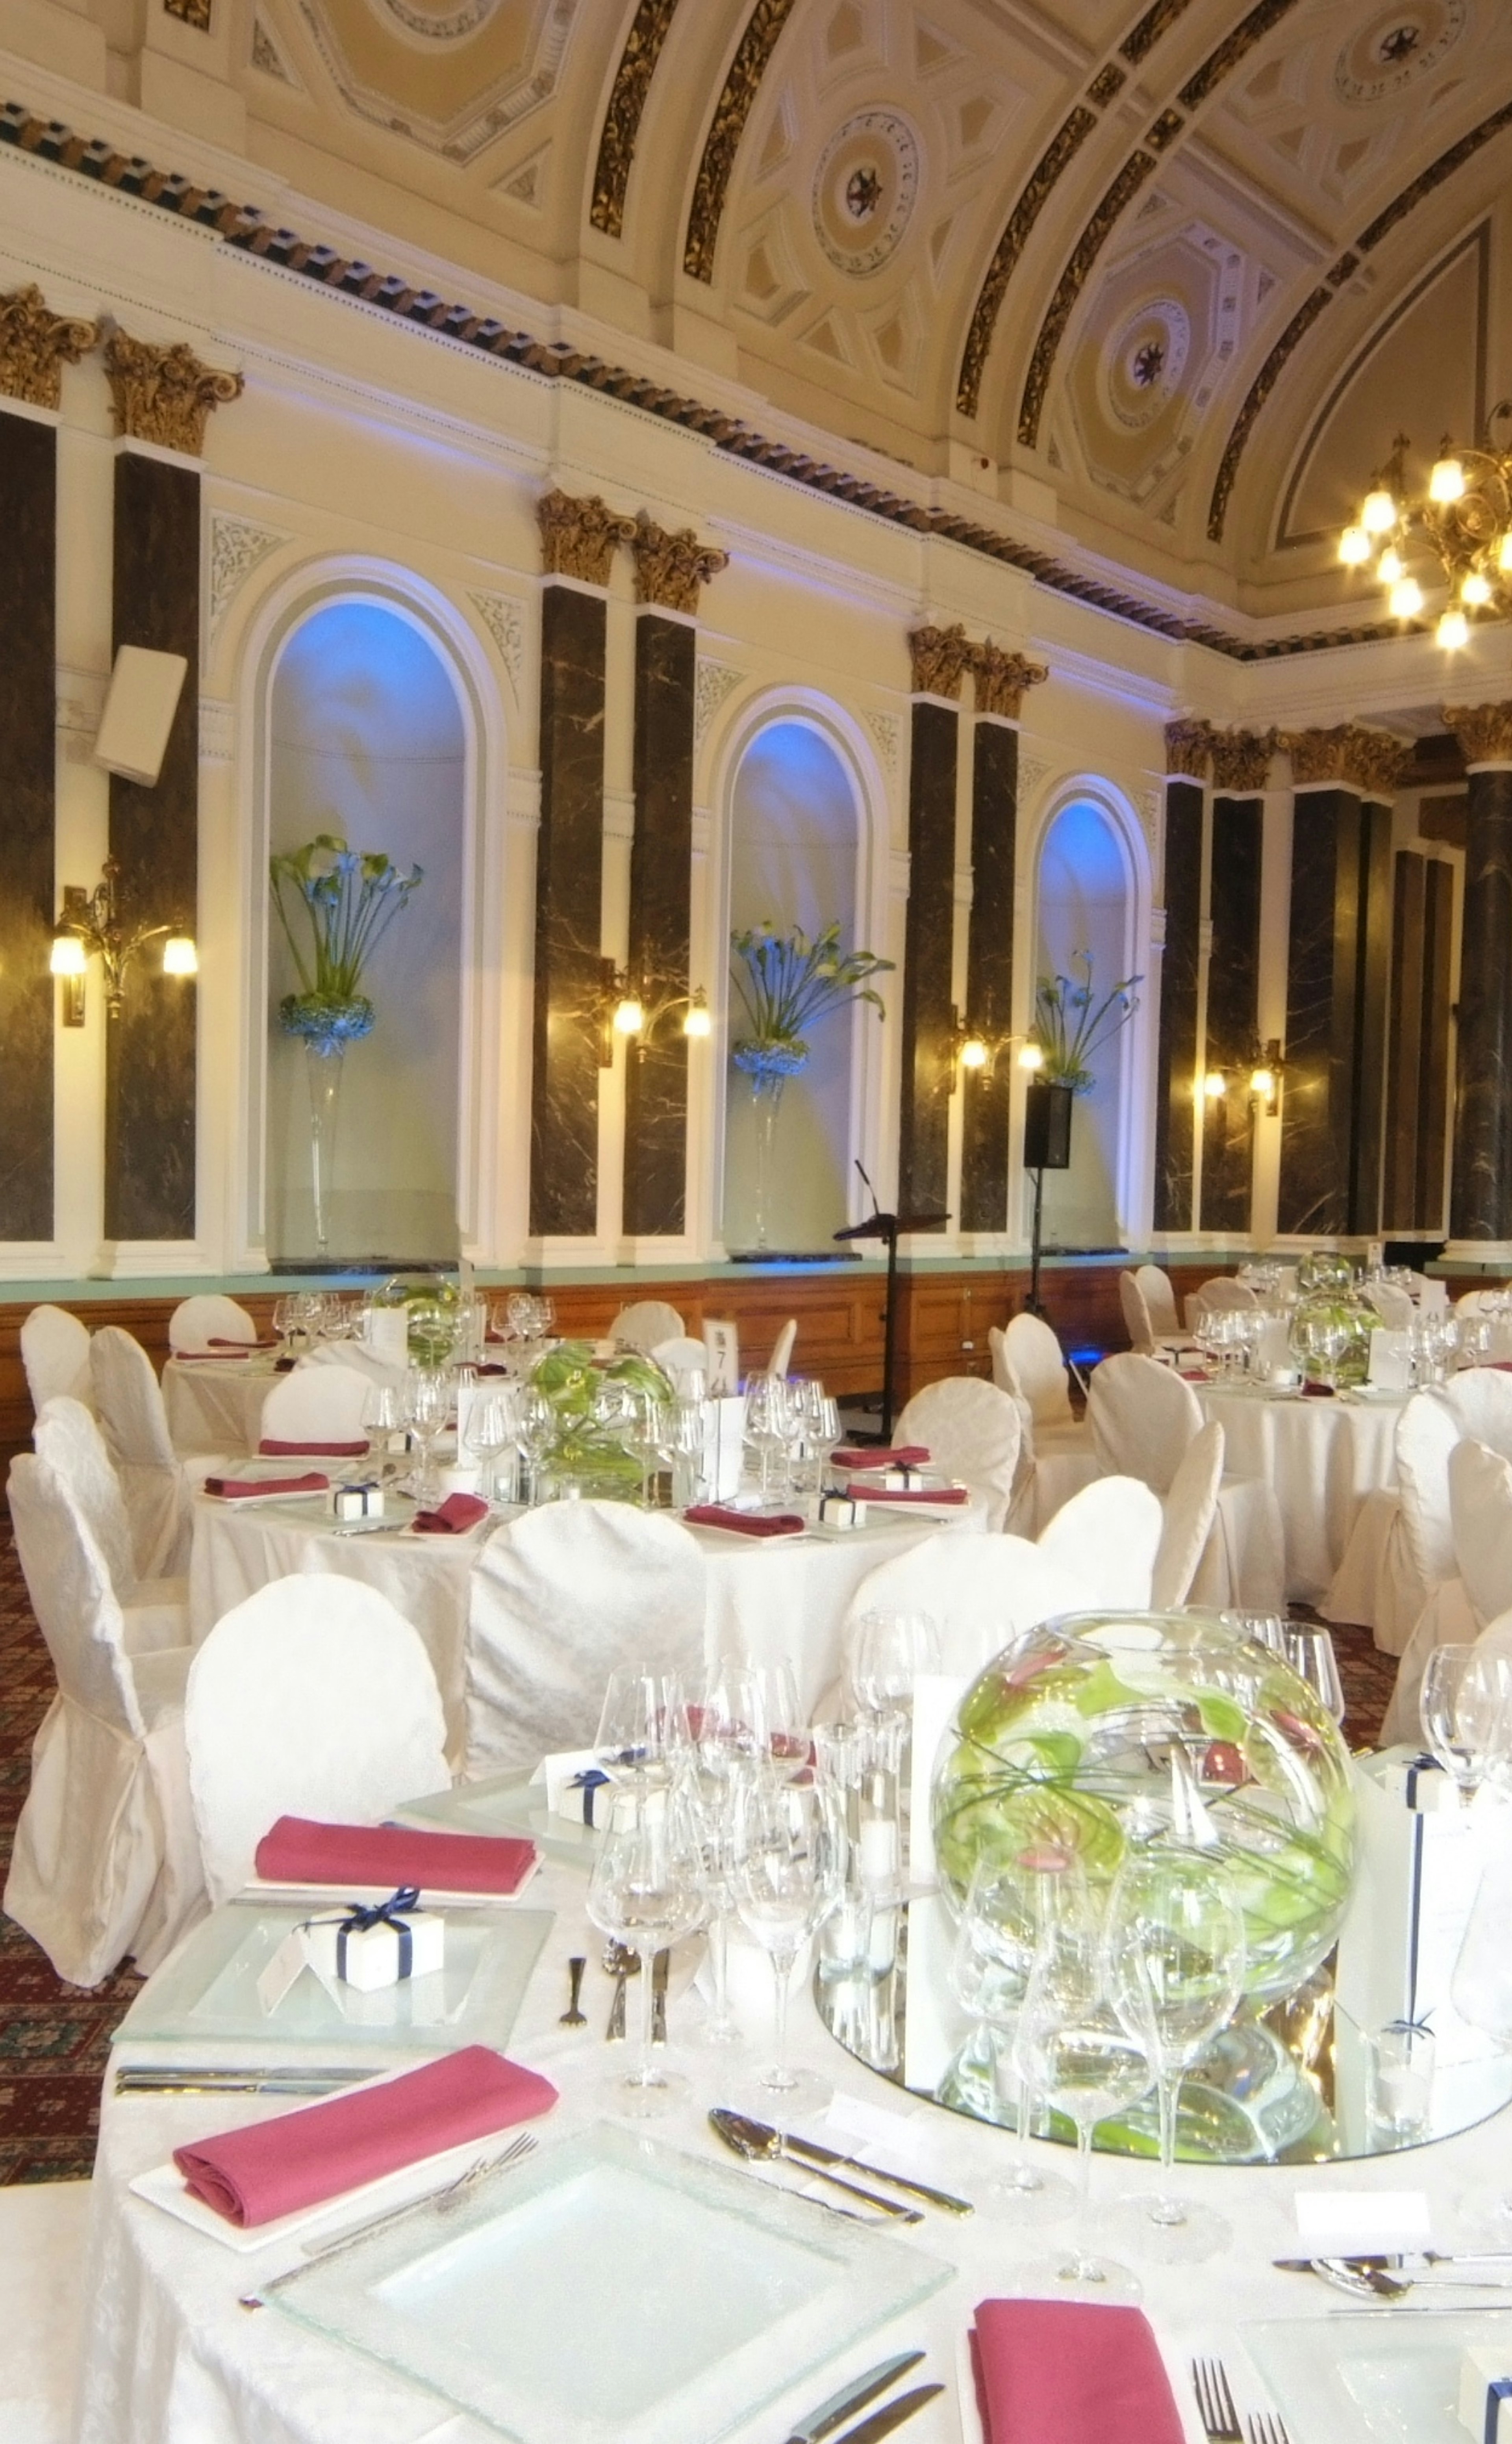 Office Christmas Party Venues - The Council House